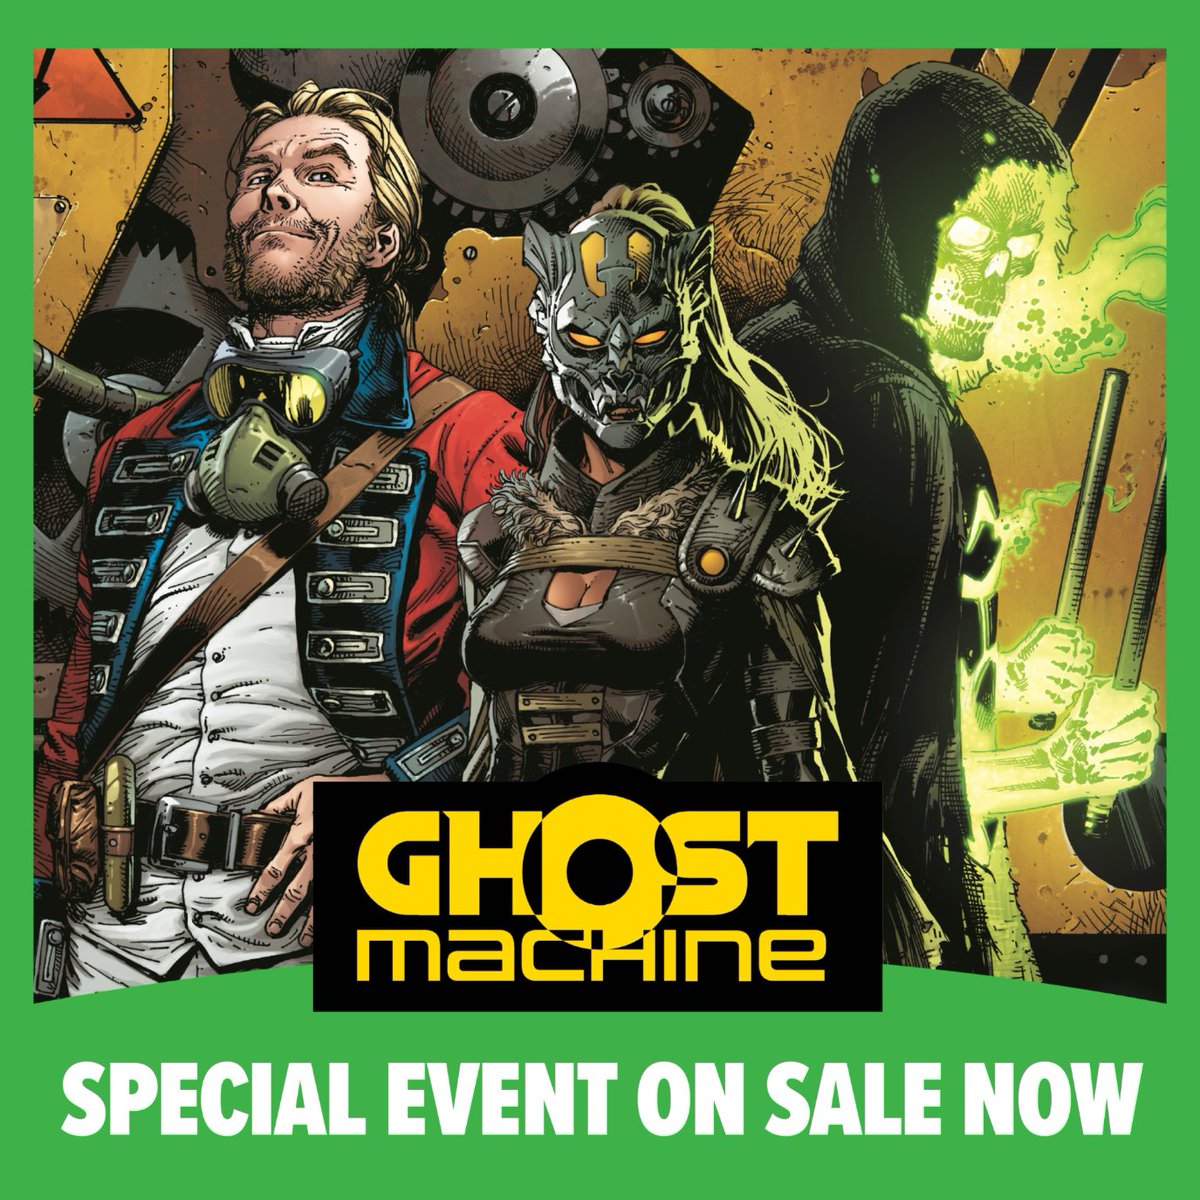 Get to know some of the biggest names in the comic industry, like Geoff Johns and Peter Tomasi, when you pull up a chair at our Celebrate the Launch of Ghost Machine special experience. Seating is limited, so get your experience tickets now. spr.ly/6017wJVoZ